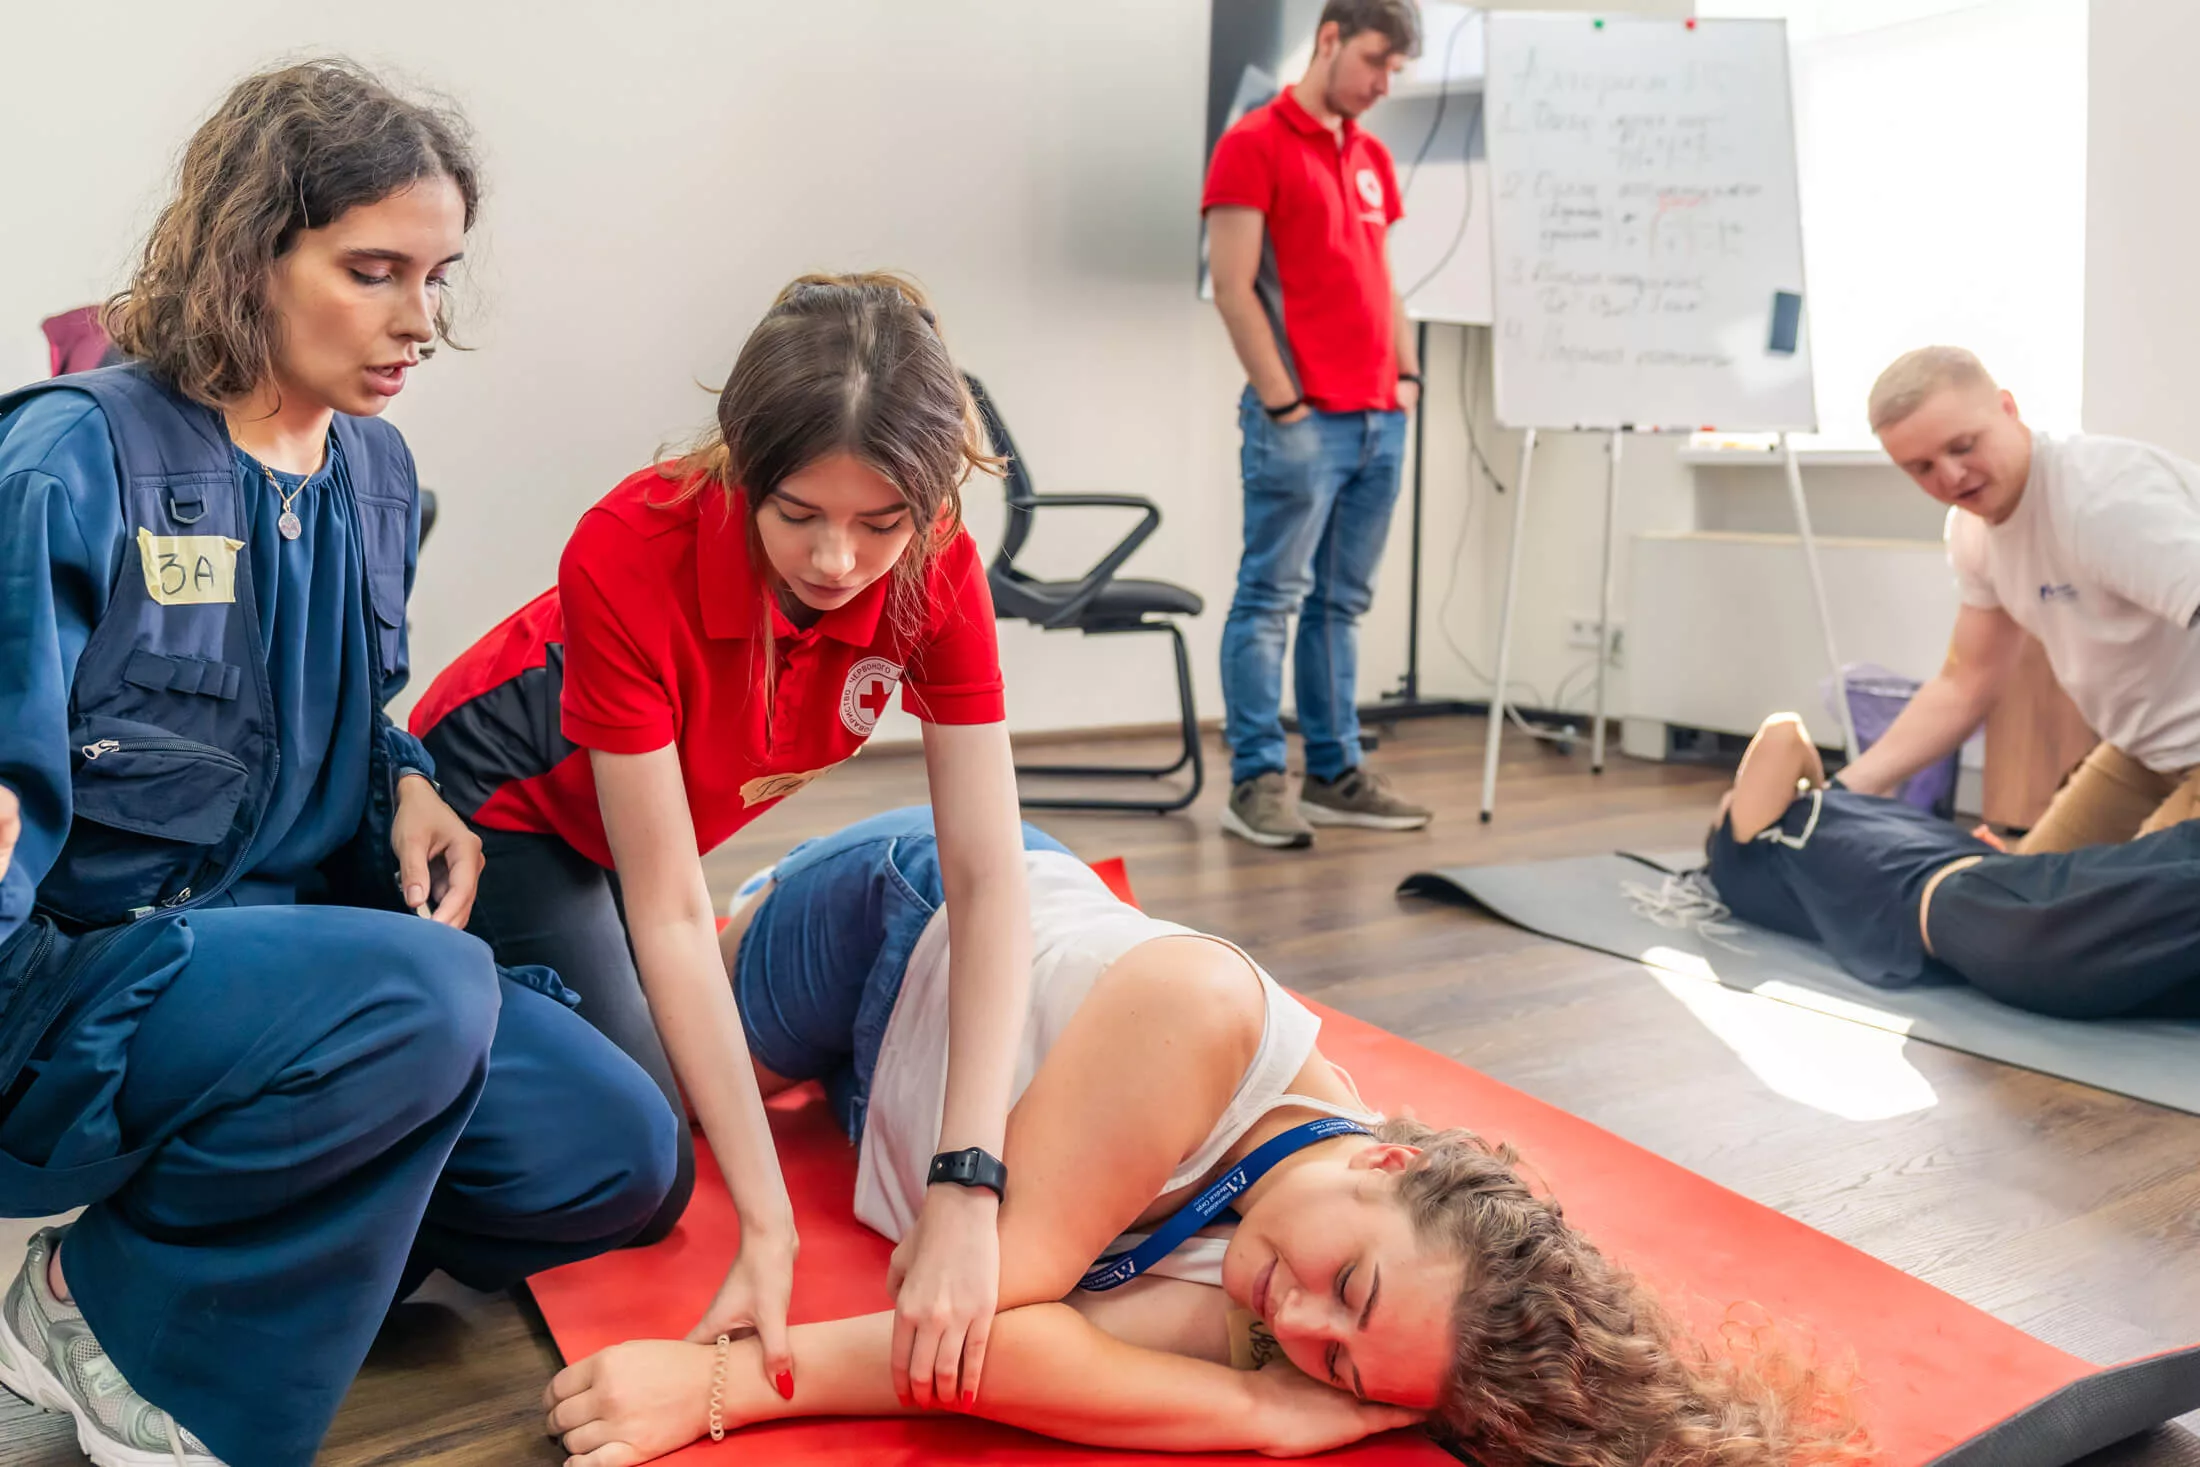 Students in our emergency first aid training learn basic yet lifesaving skills such as CPR.